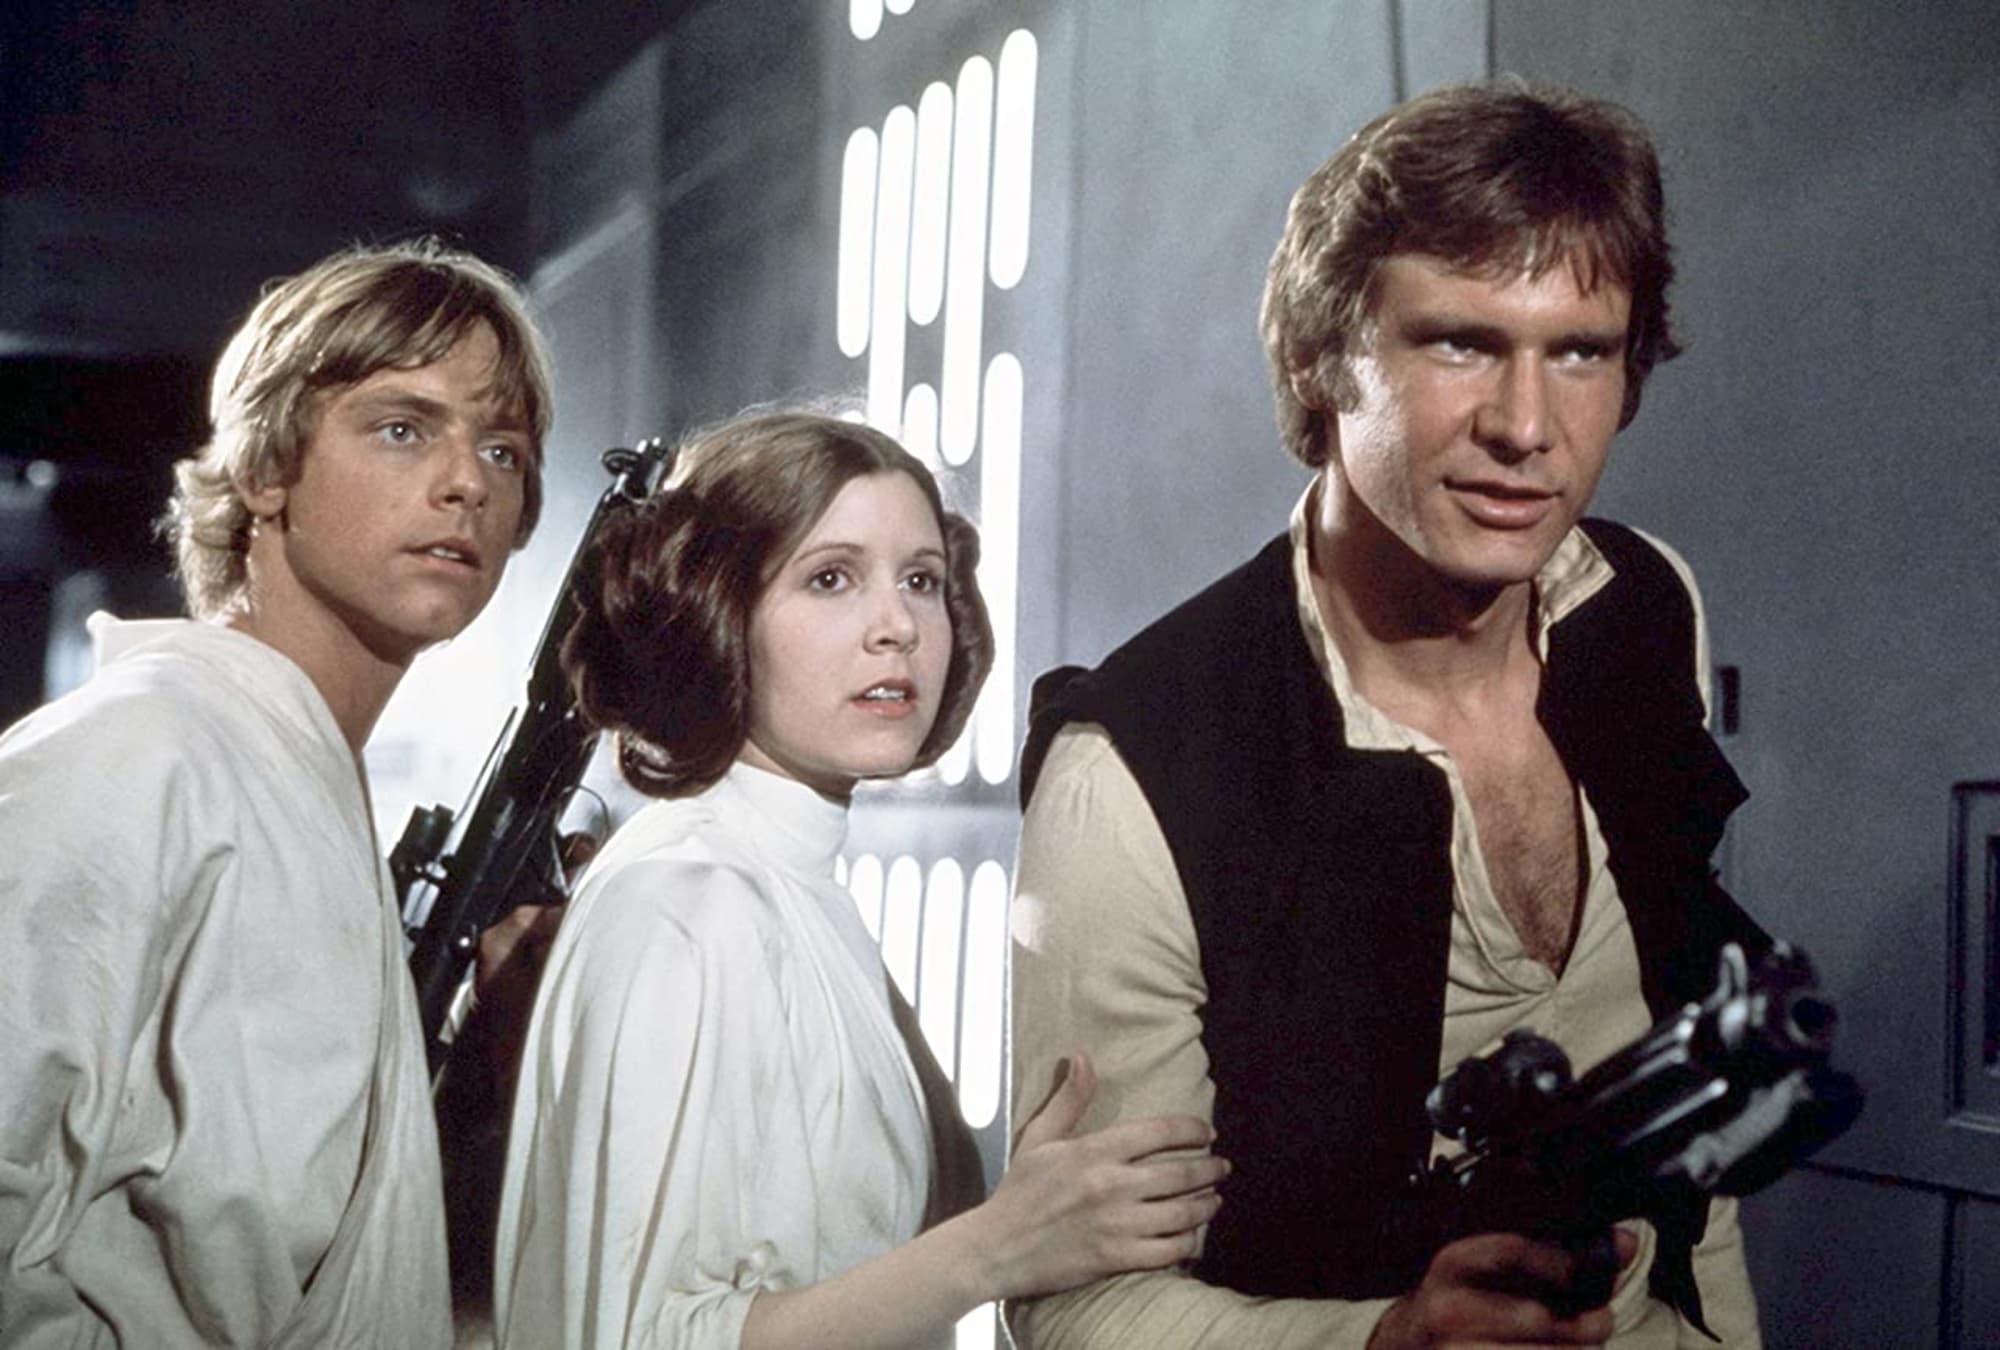 what year did the first star wars movie come out?